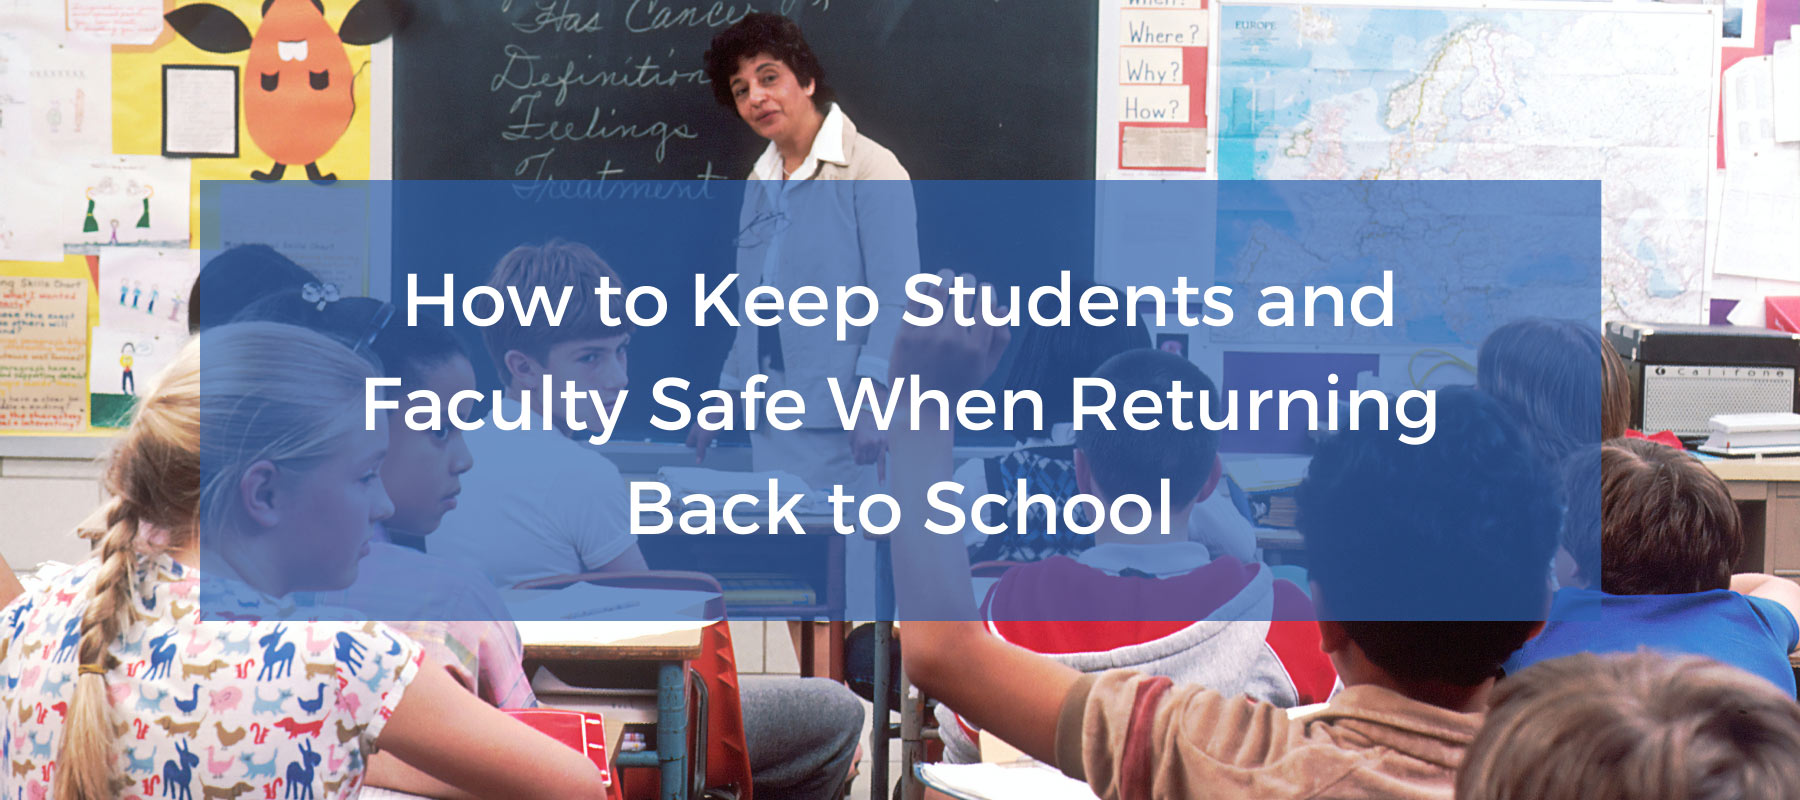 How to Keep Students and Faculty Safe When Returning Back to School